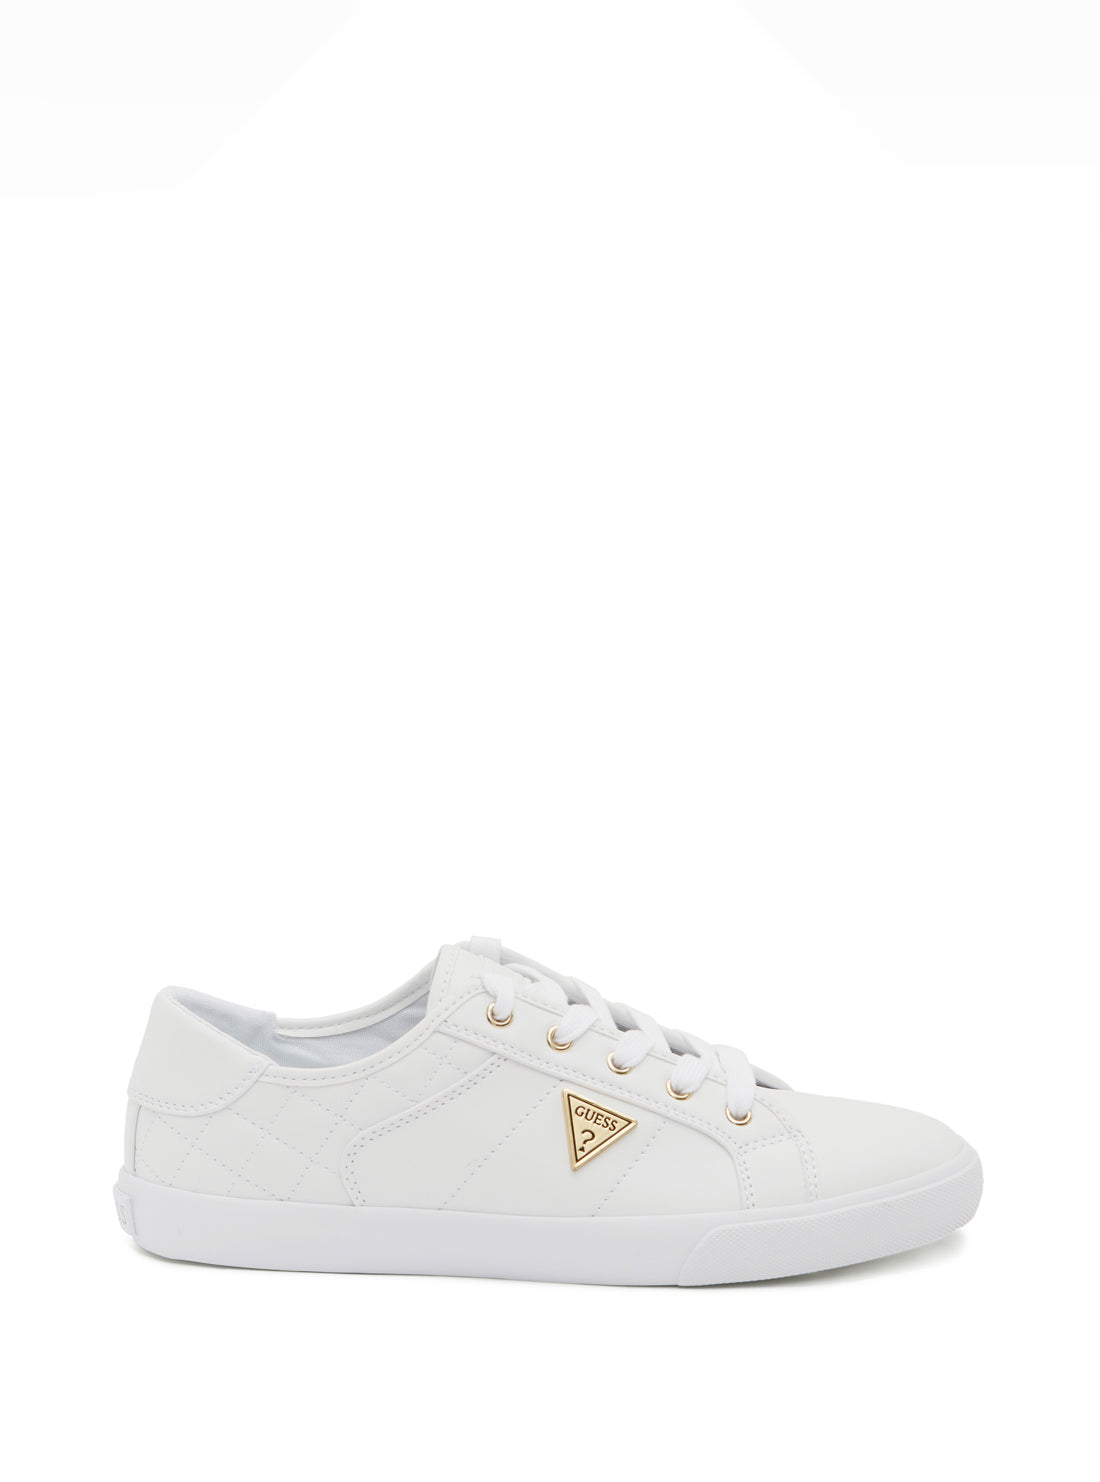 GUESS Women's White Comly Low Top Sneakers COMLY2-A Side View